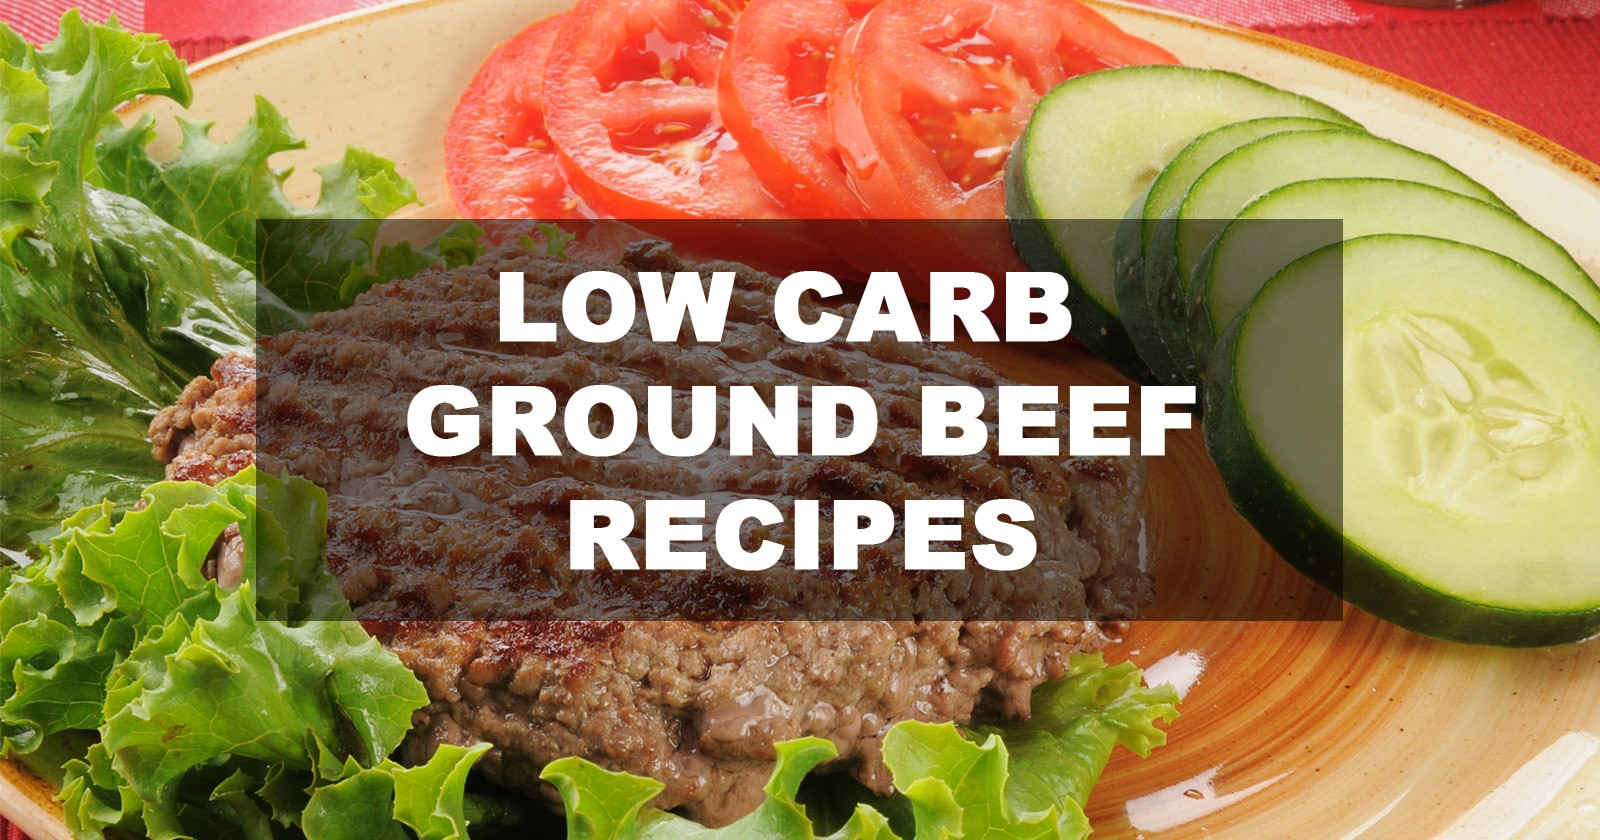 Low Carb Recipes Ground Beef
 Best Low Carb Ground Beef Recipes October 2018